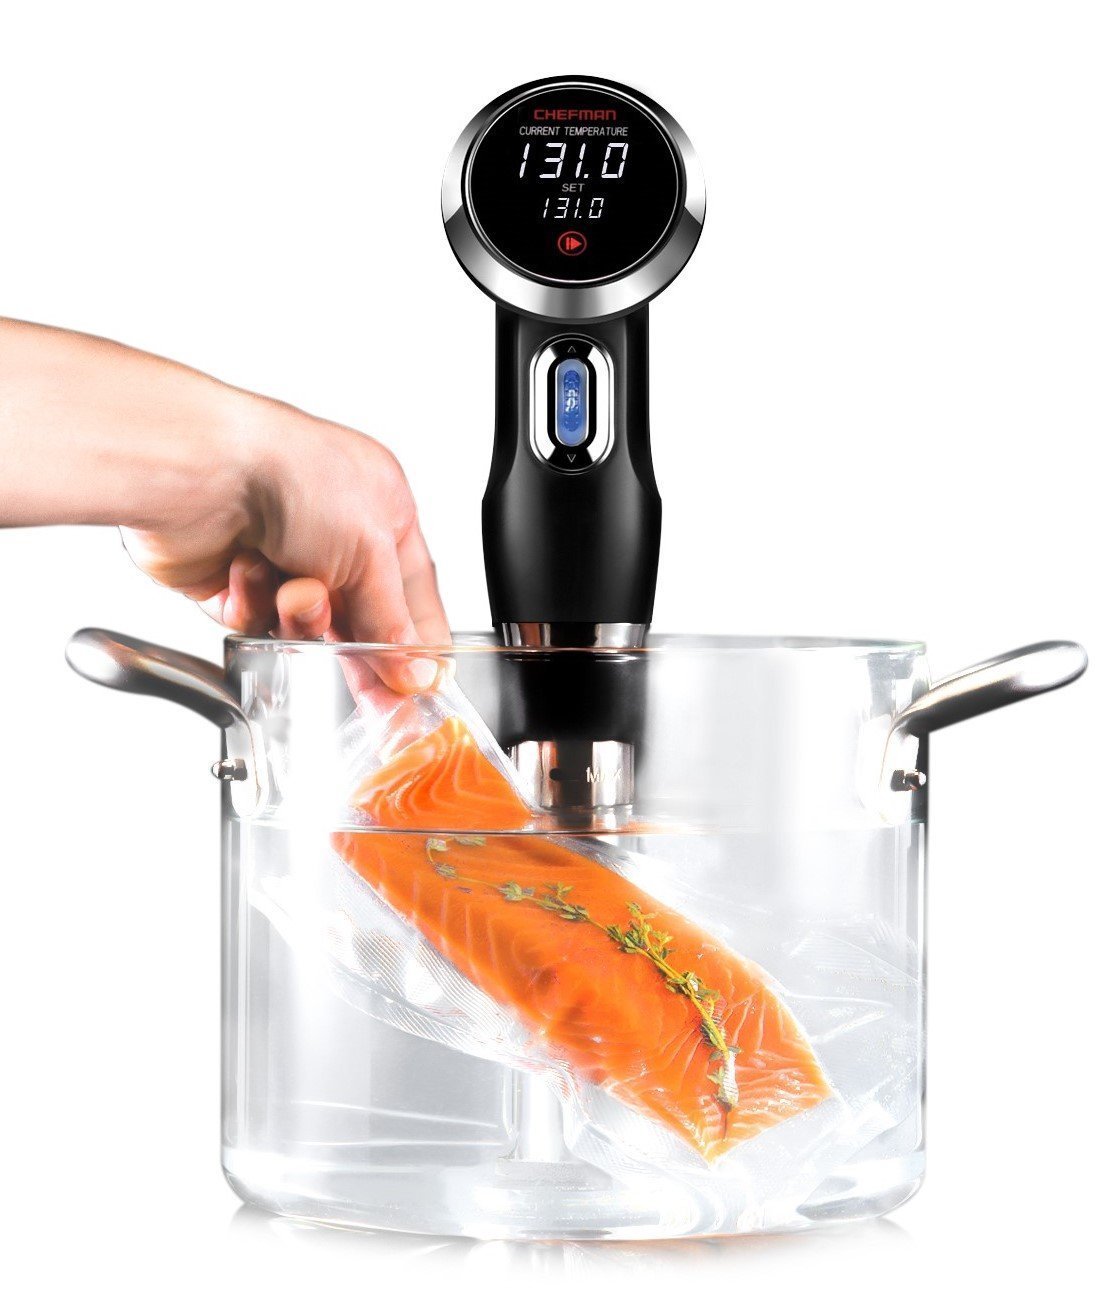 Today only: Chefman Sous Vide precision cooker for $54 shipped